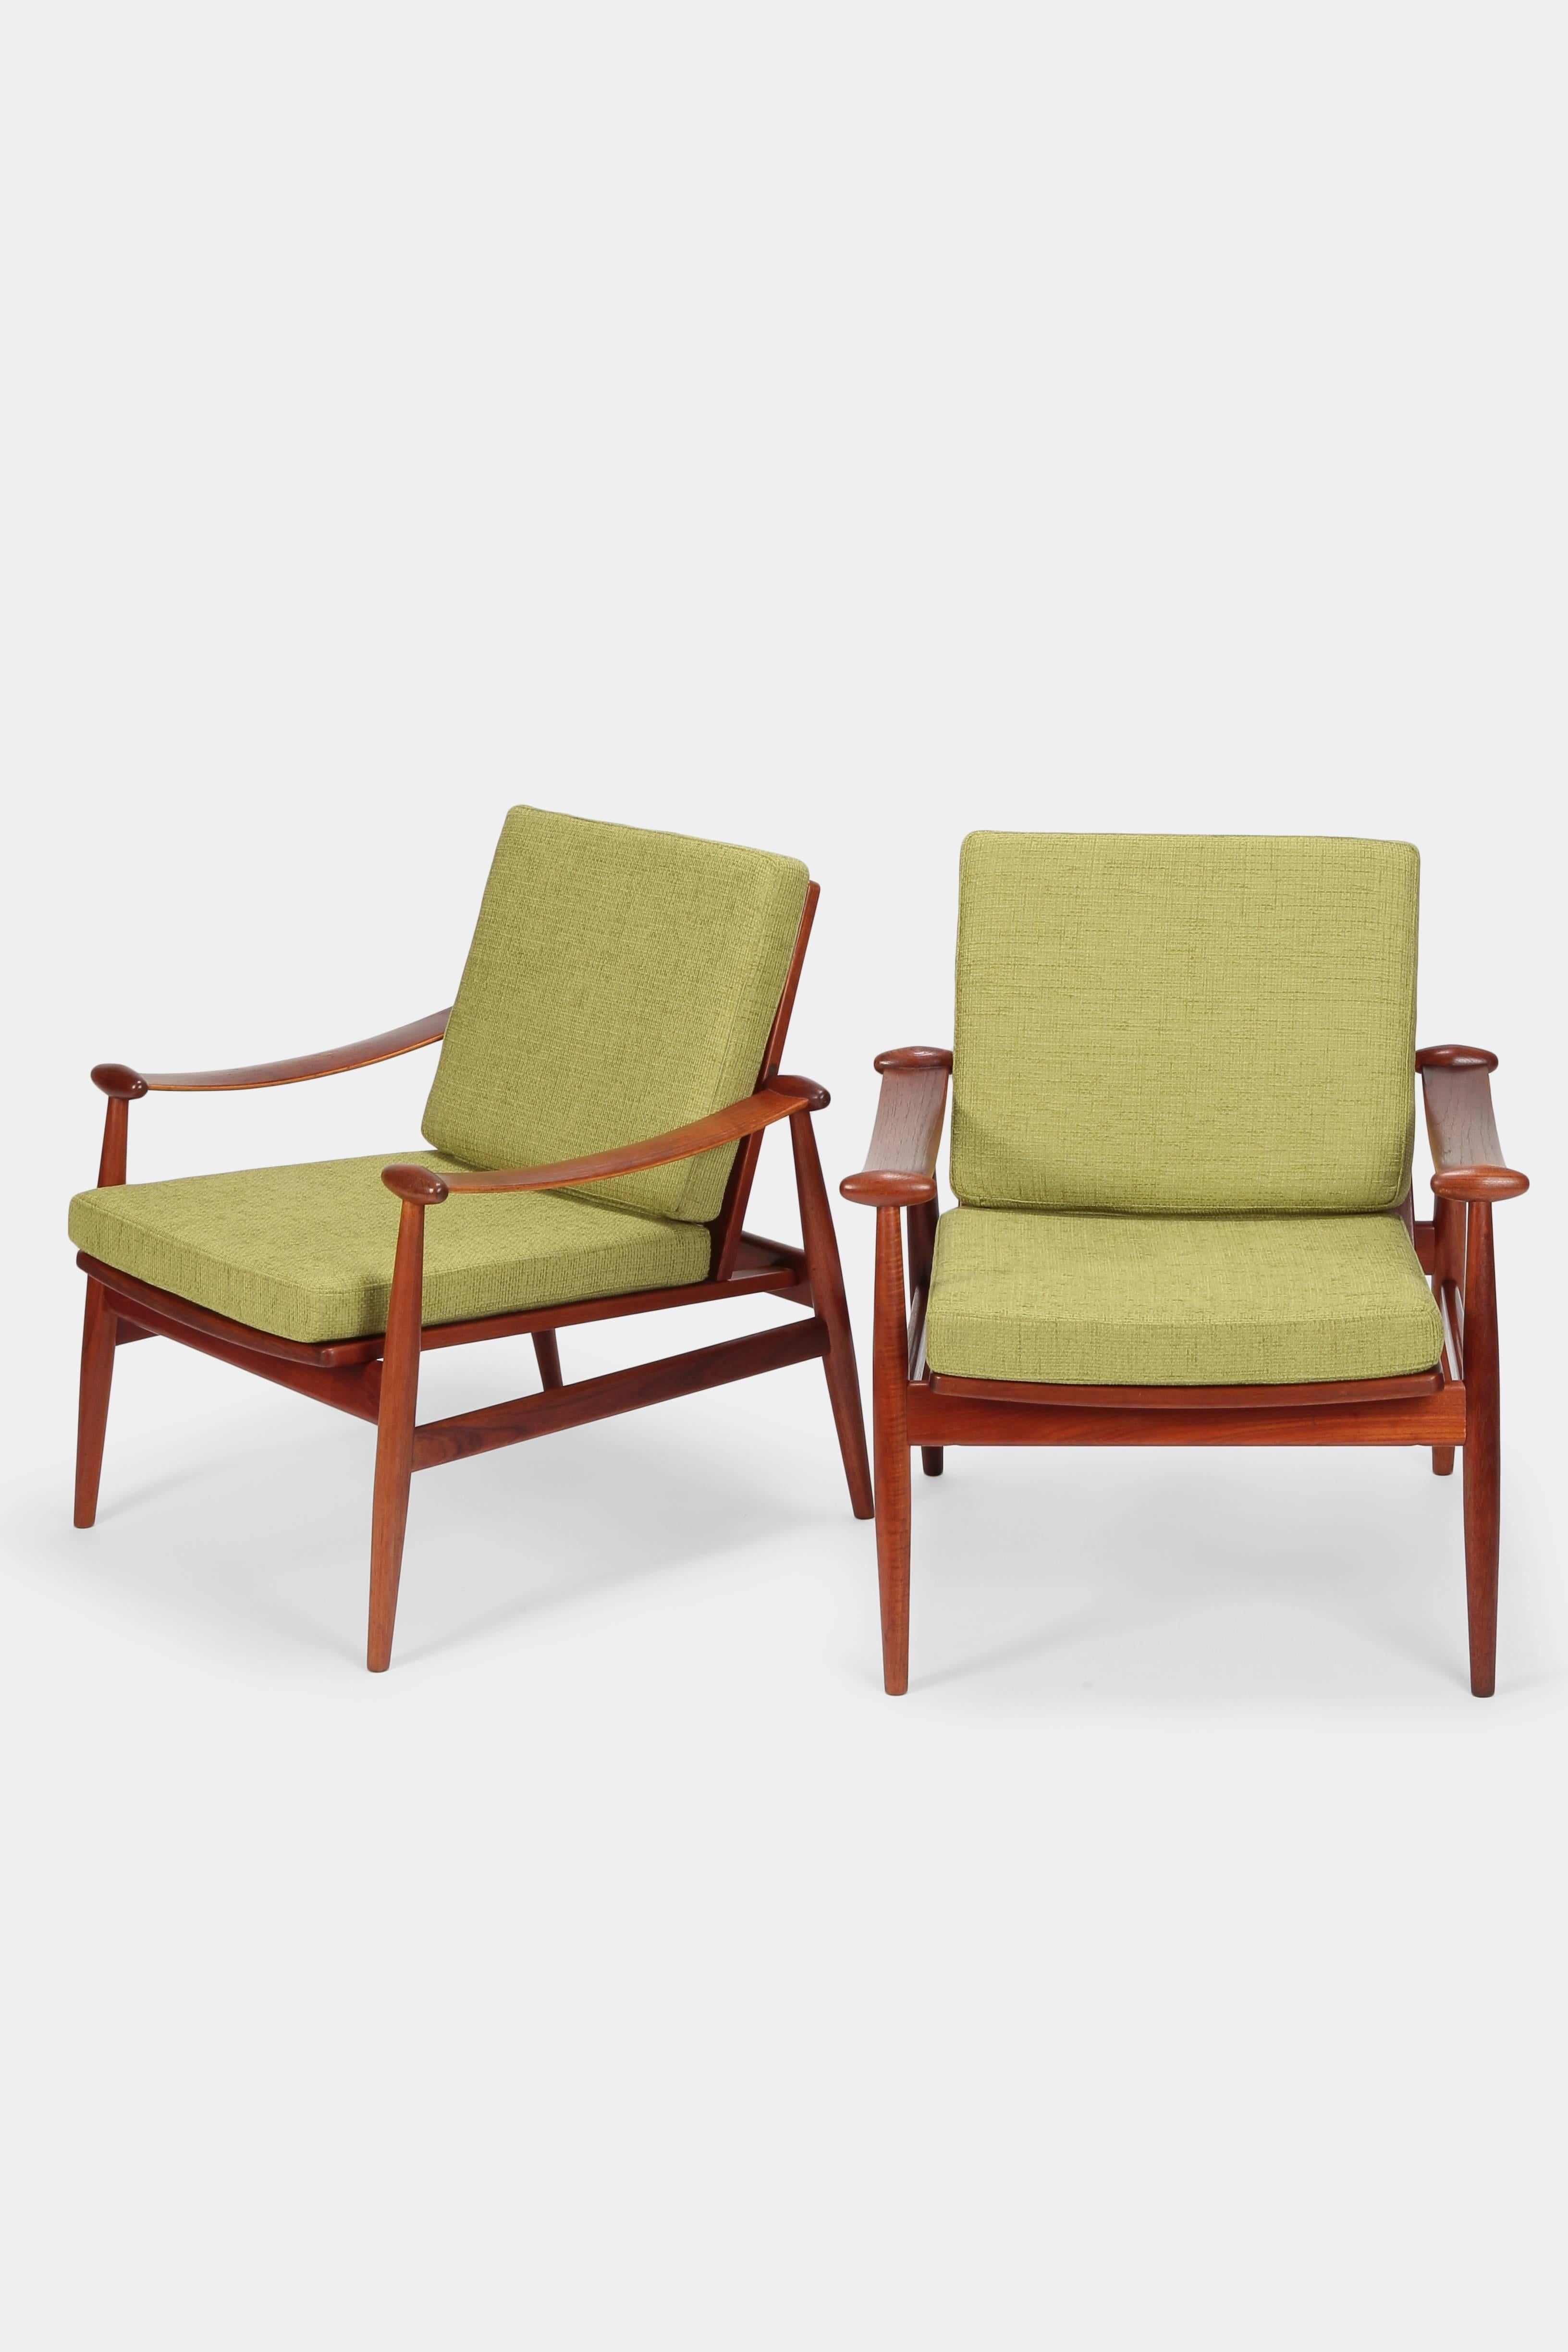 Finn Juhl “Spade” lounge chairs model 133 manufactured by France & Daverkosen in the 1960s in Denmark. Stunning chairs with a refined teak wood frame and brass hardware. Foam cushions and the cotton blend covers were renewed in the 1980s. This was